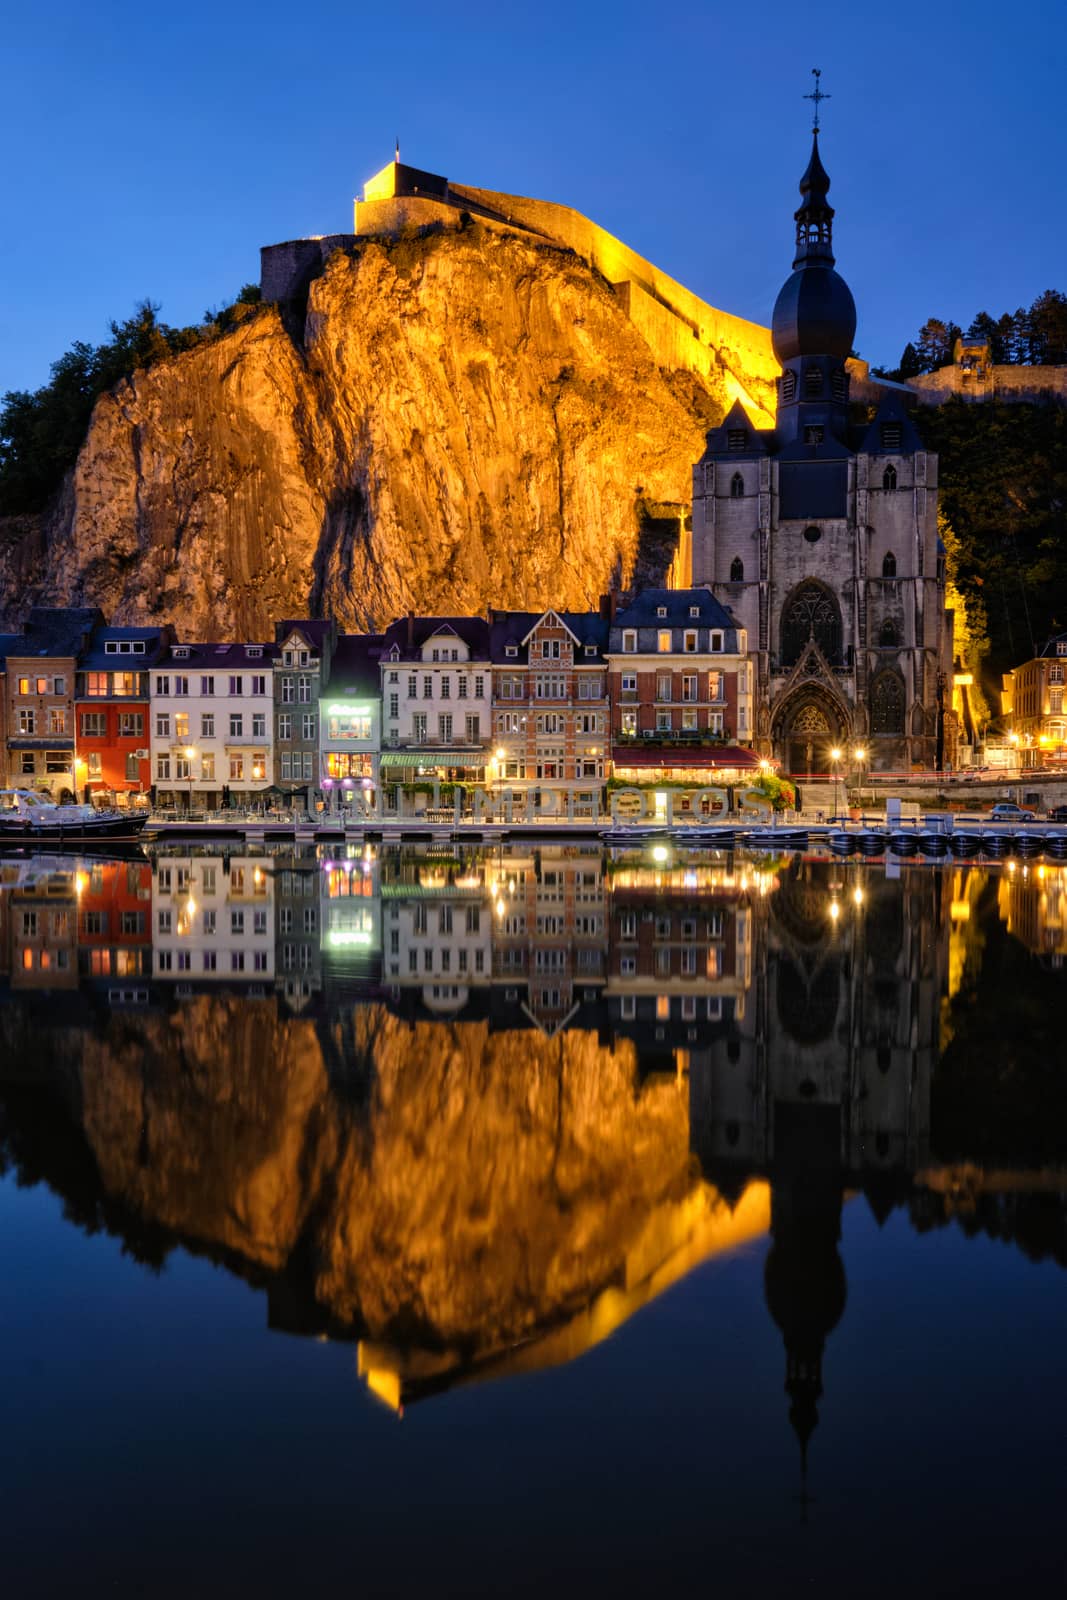 Night view of Dinant town, Belgium by dimol